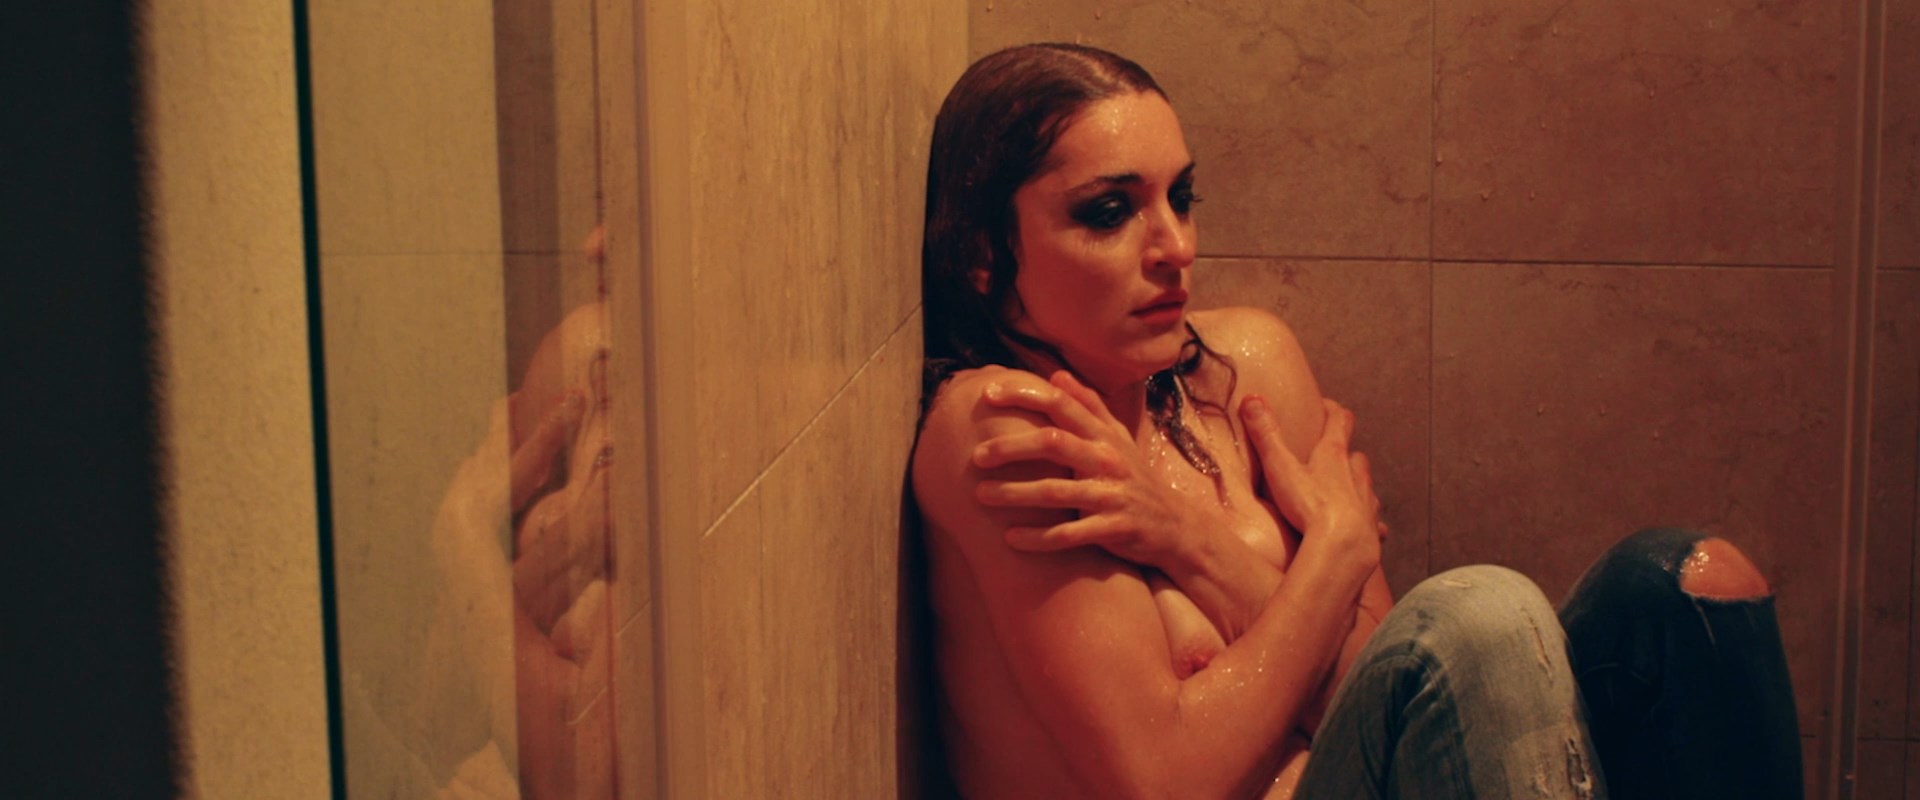 Youlika Skafida is in the shower topless and bloodied.